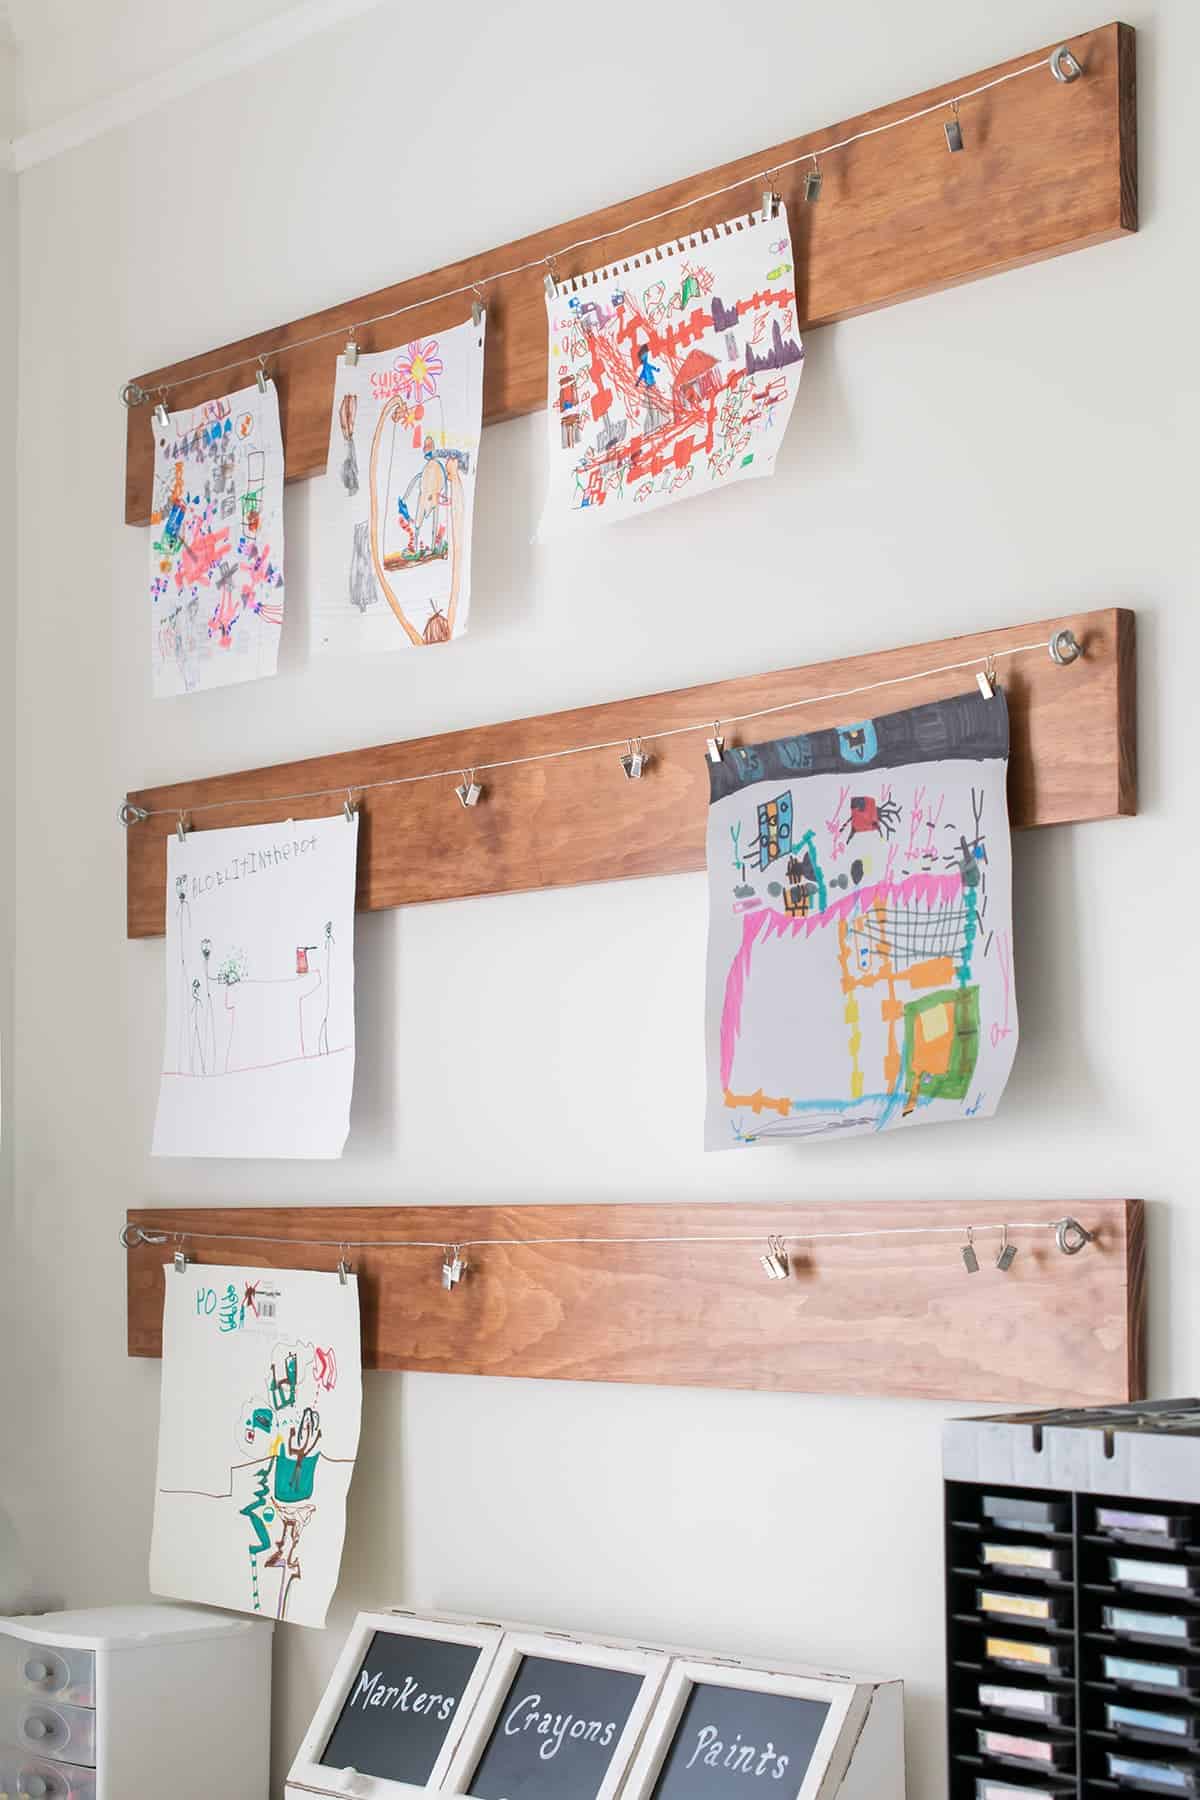 Three wooden planks hanging on white wall with Child's art display clipped to hanging metal wire. 